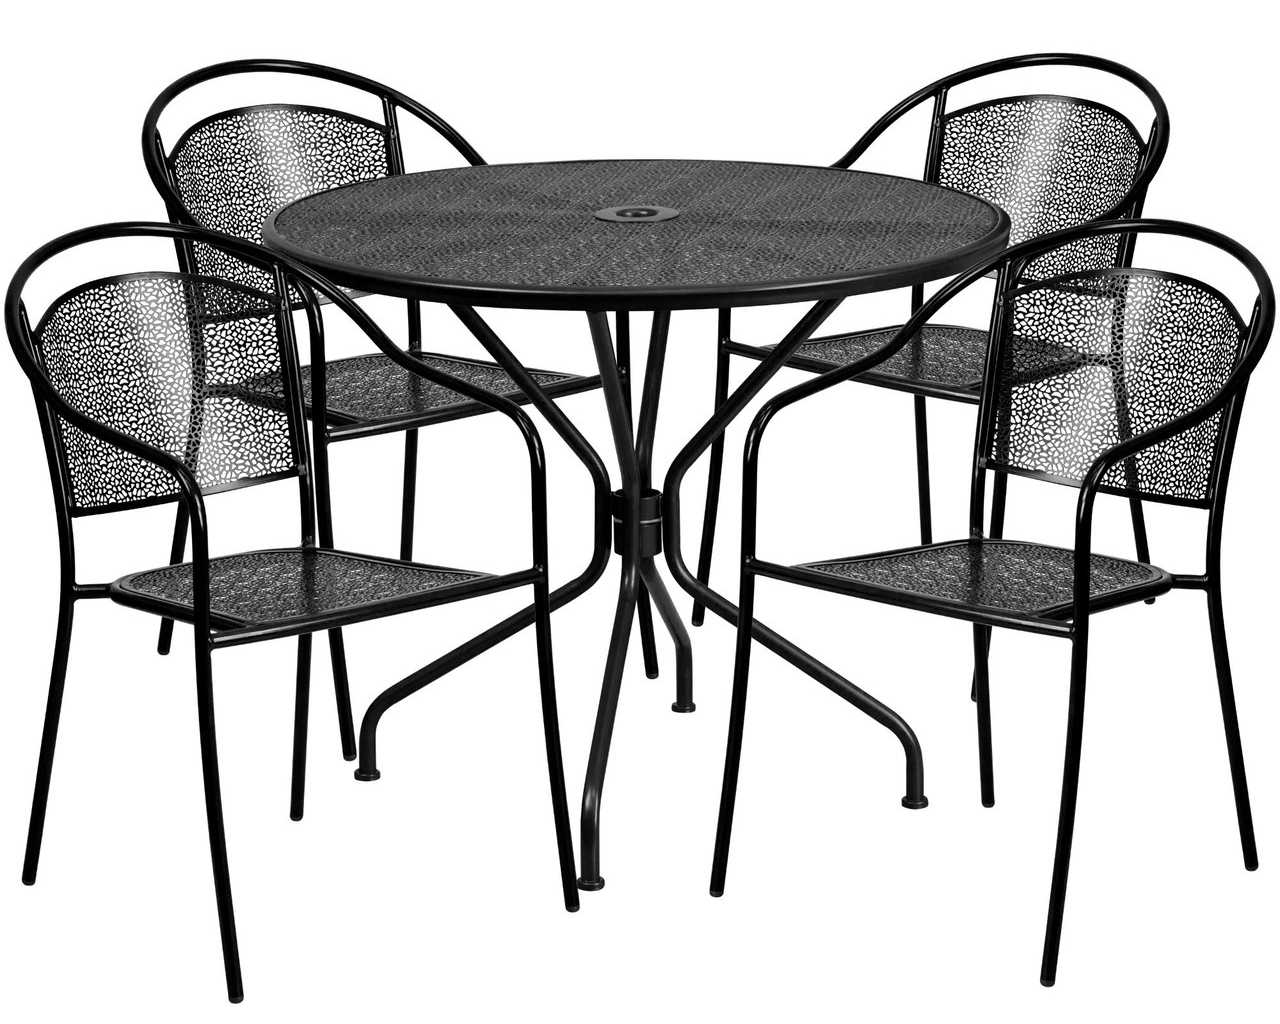 black steel powder coated dining set with round table and four armchairs